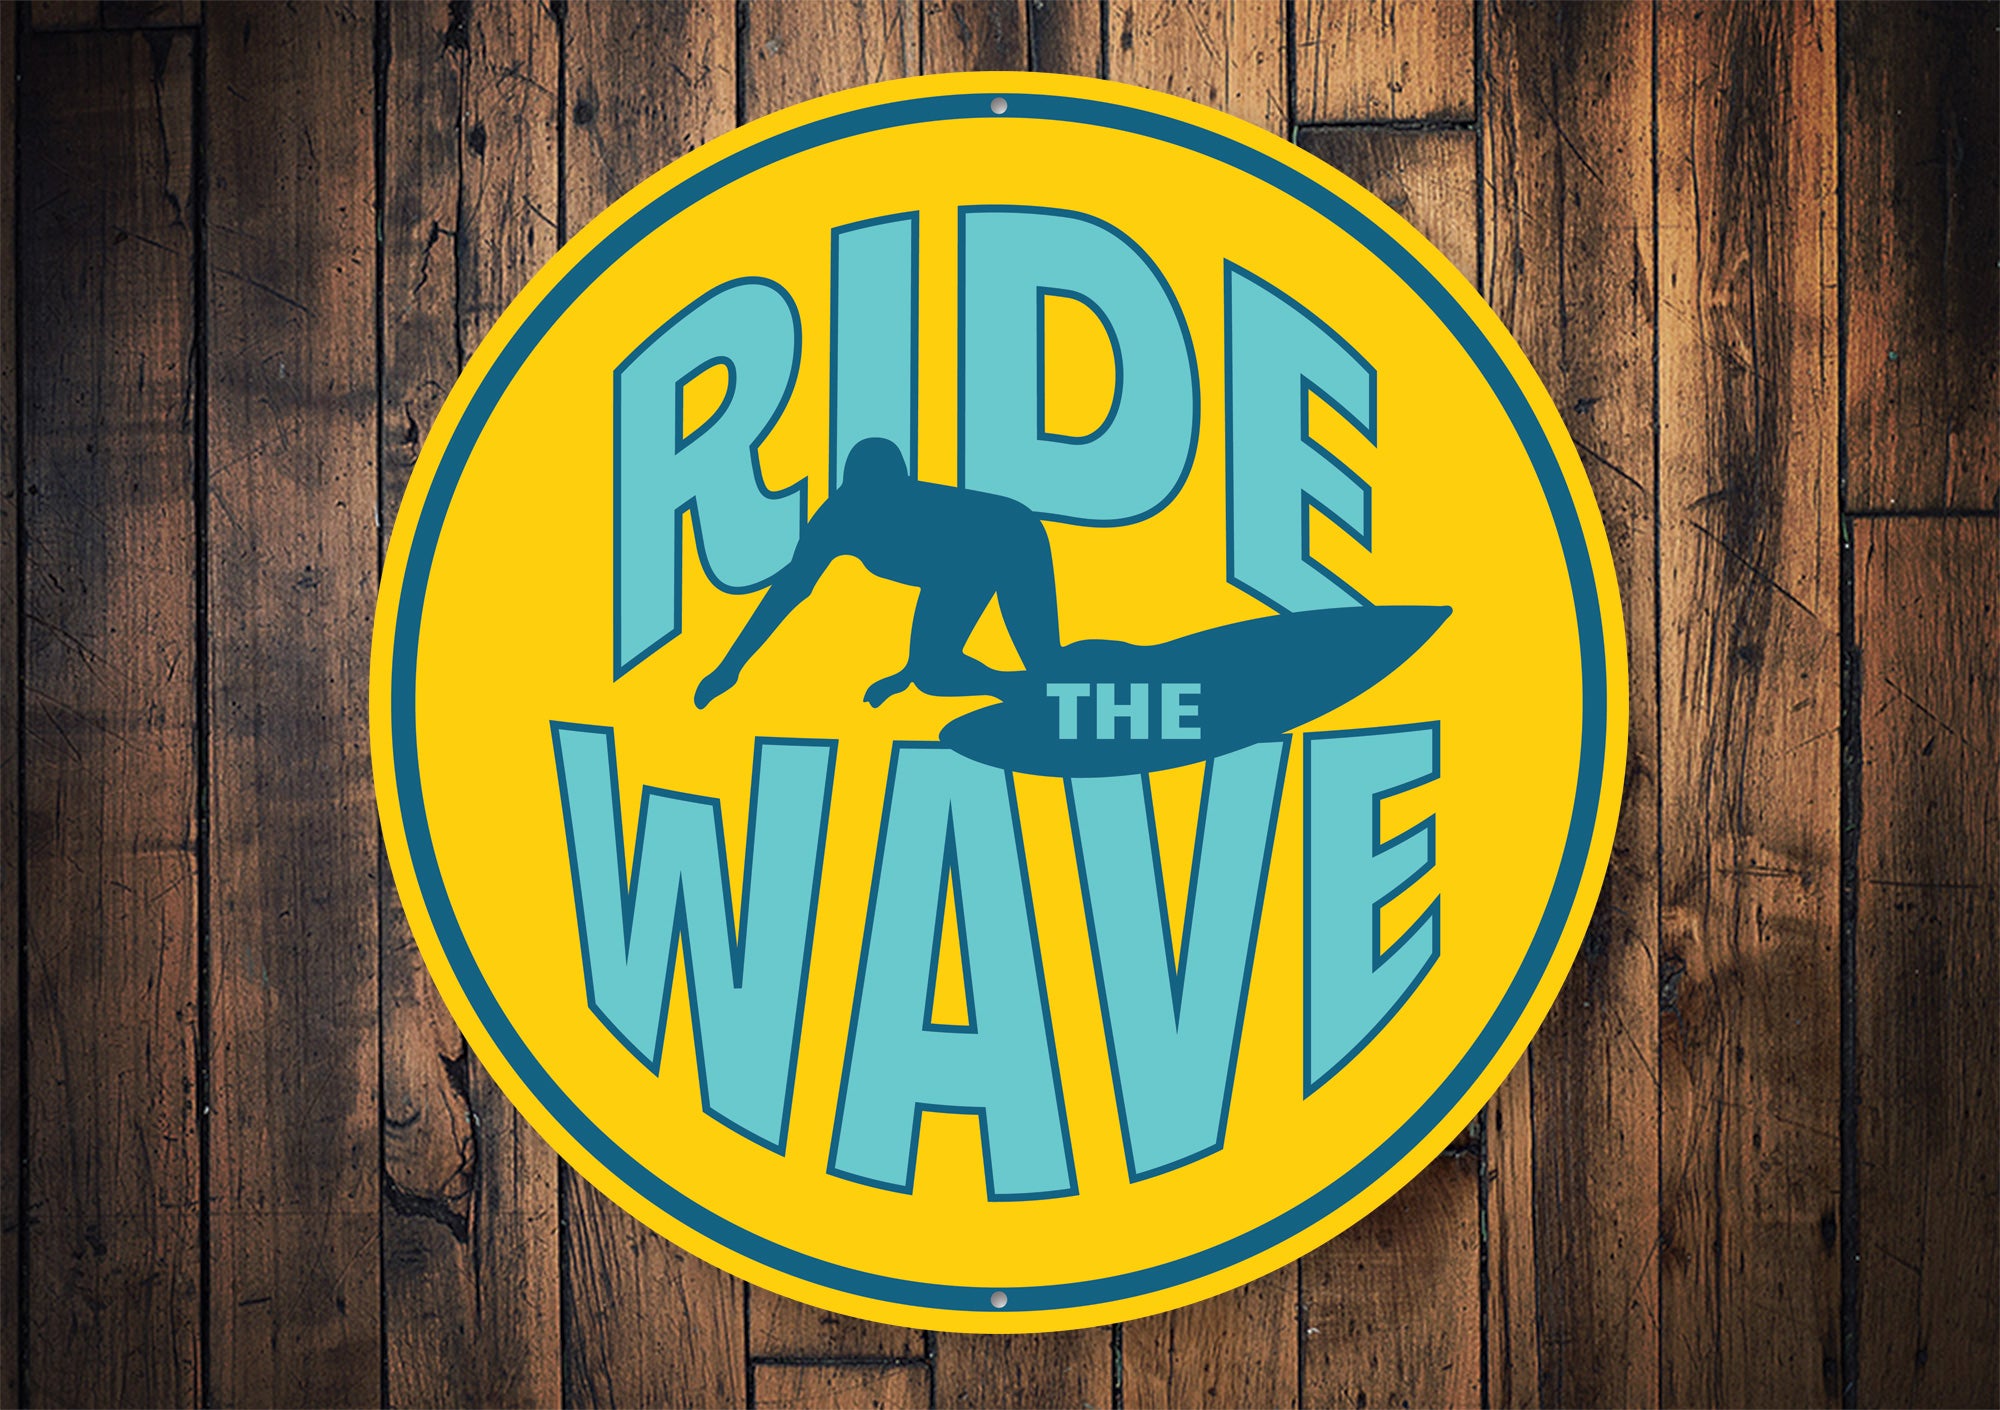 Ride the Wave Sign